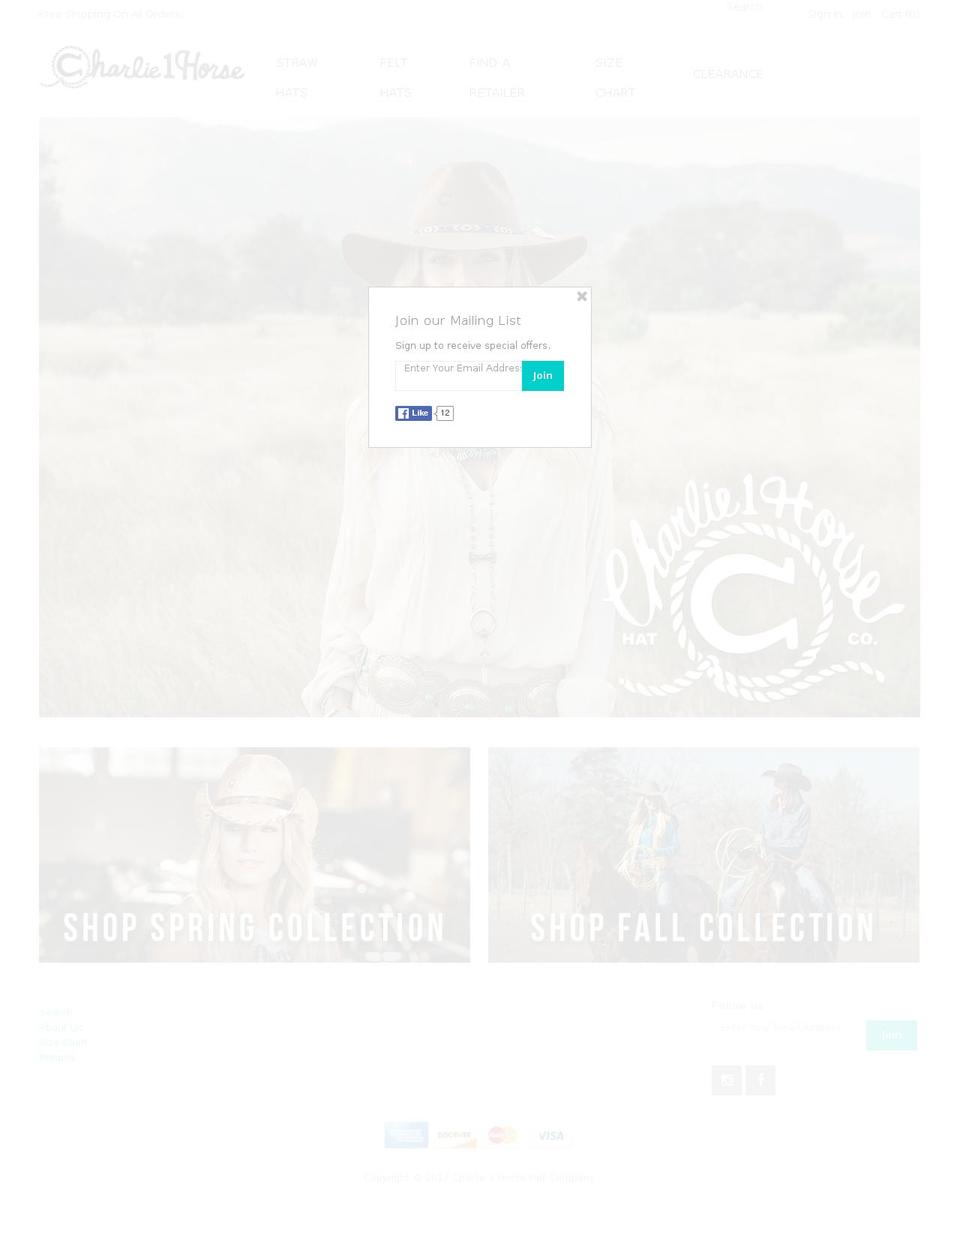 Mr Parker Shopify theme site example charlie1horsehats.com